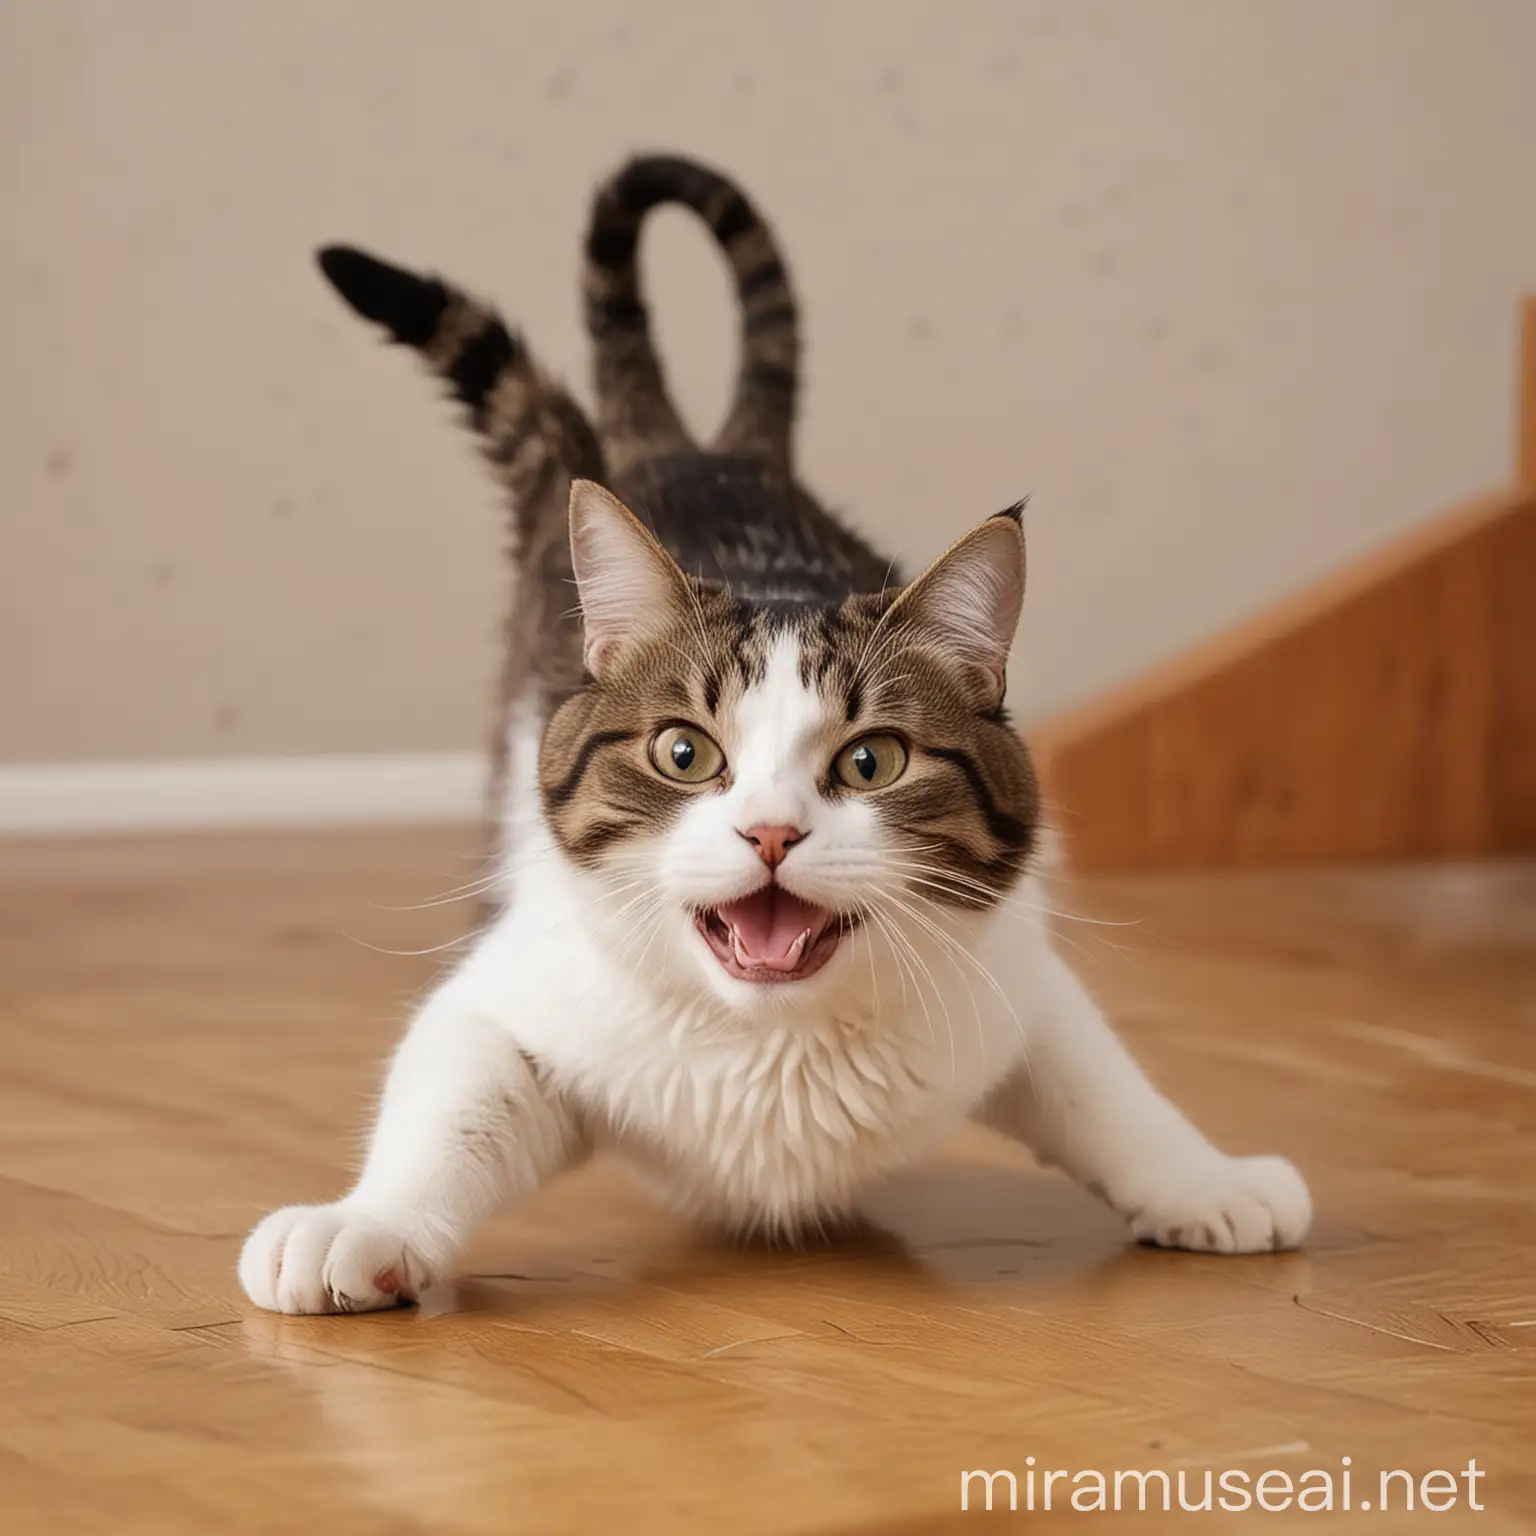 Capture clips of your cats making silly faces, rolling around, or chasing their tails.